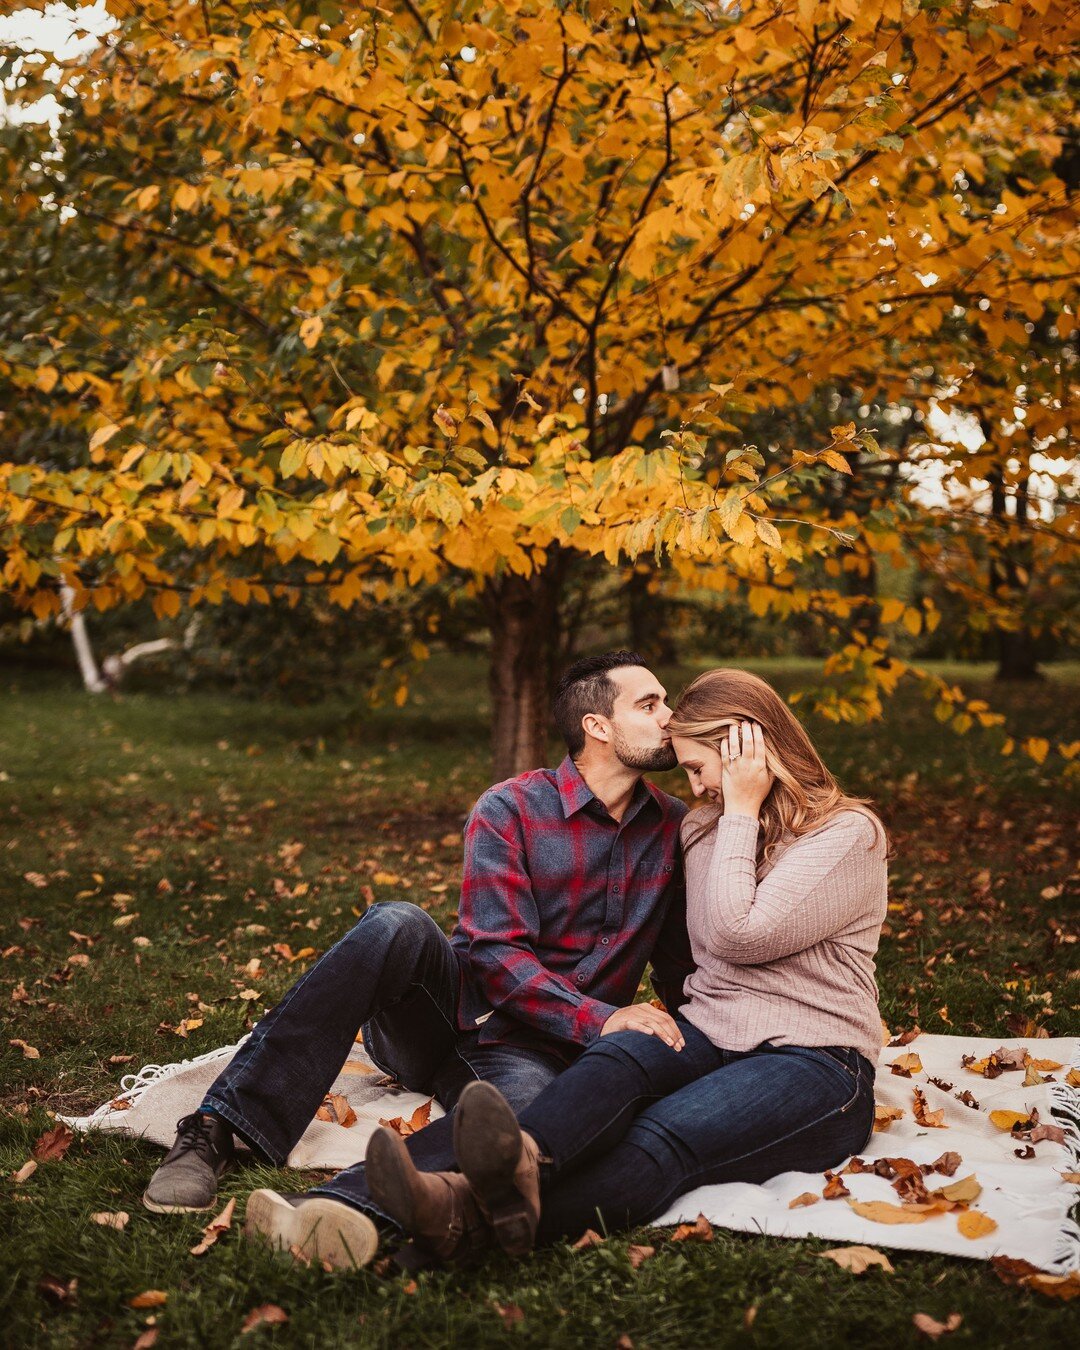 Another great location for Fall engagement session @arnold_arboretum 

#arnoldarboretum #arnoldarboretumofharvard #arnoldarboretumboston #arnoldarboretumofharvarduniversity #arnoldarboretumphotographer #arnoldarboretumengagementsession #arnoldarboret